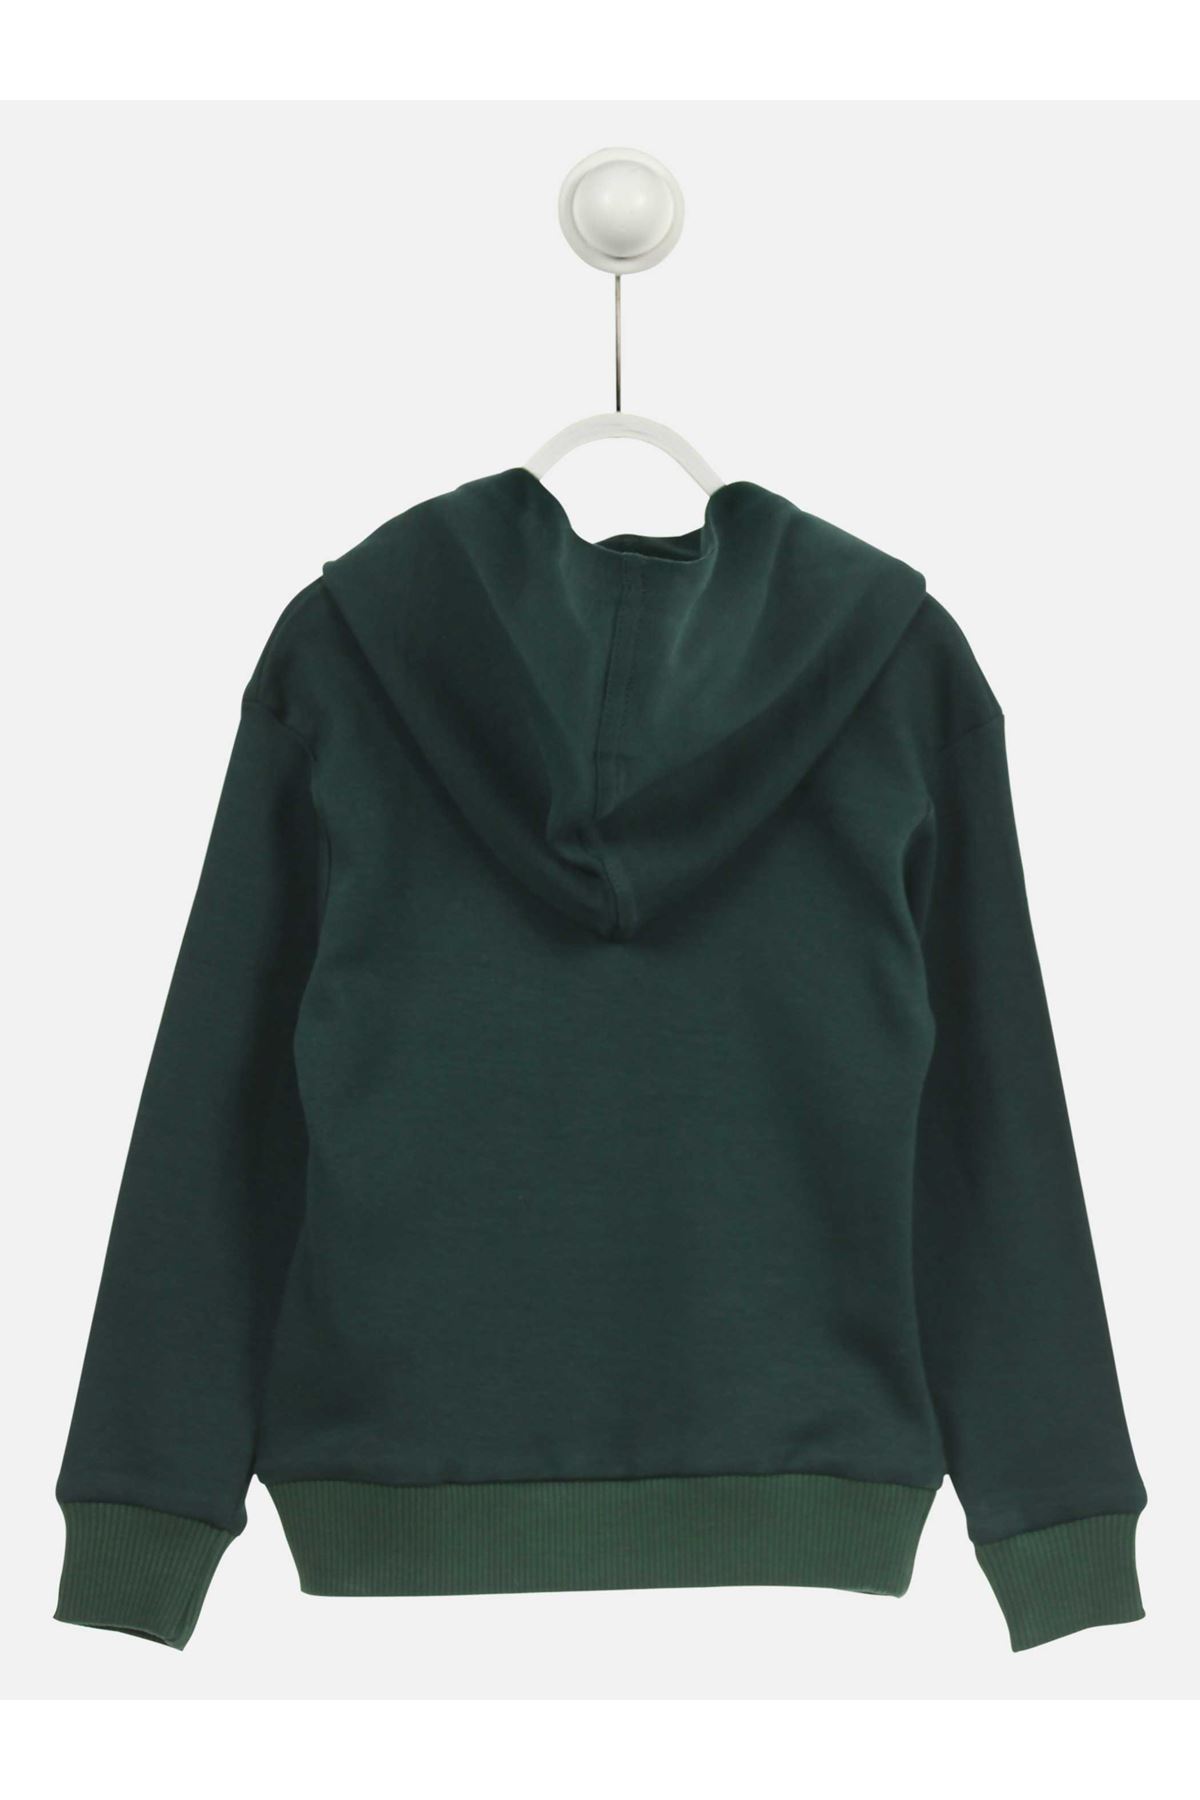 Green Male Child Hooded Sweat